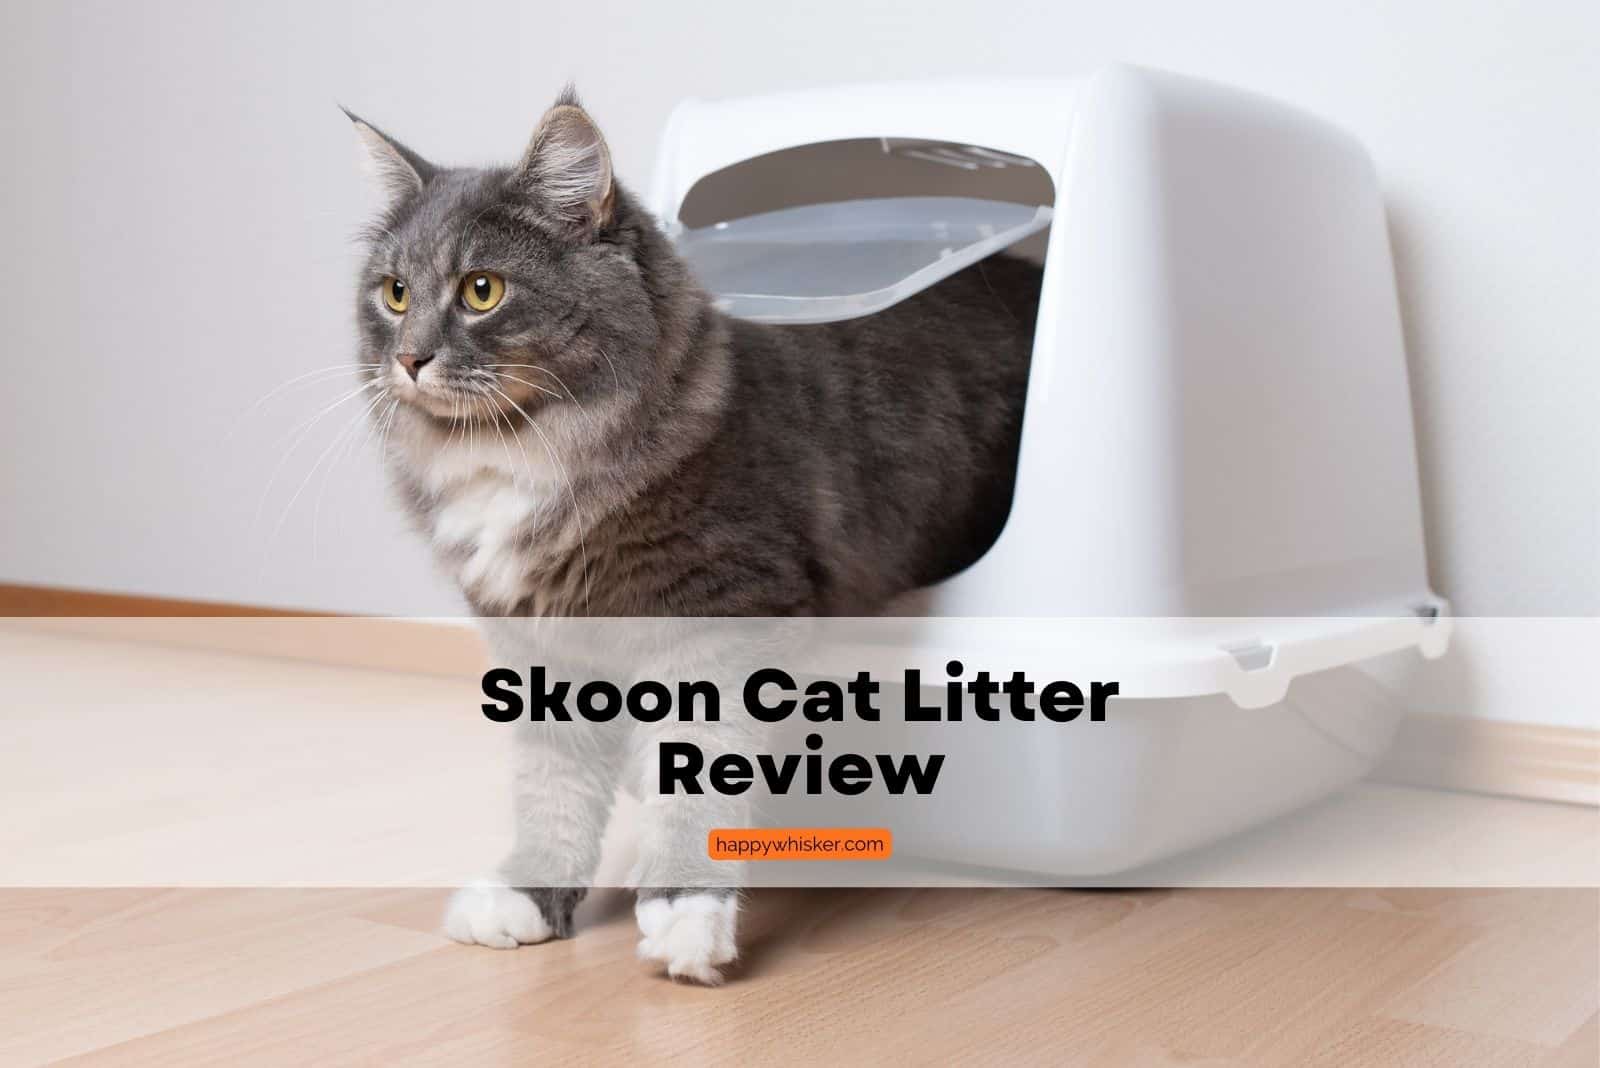 long haired cat stepping out of a litter box, where skoon cat litter was used